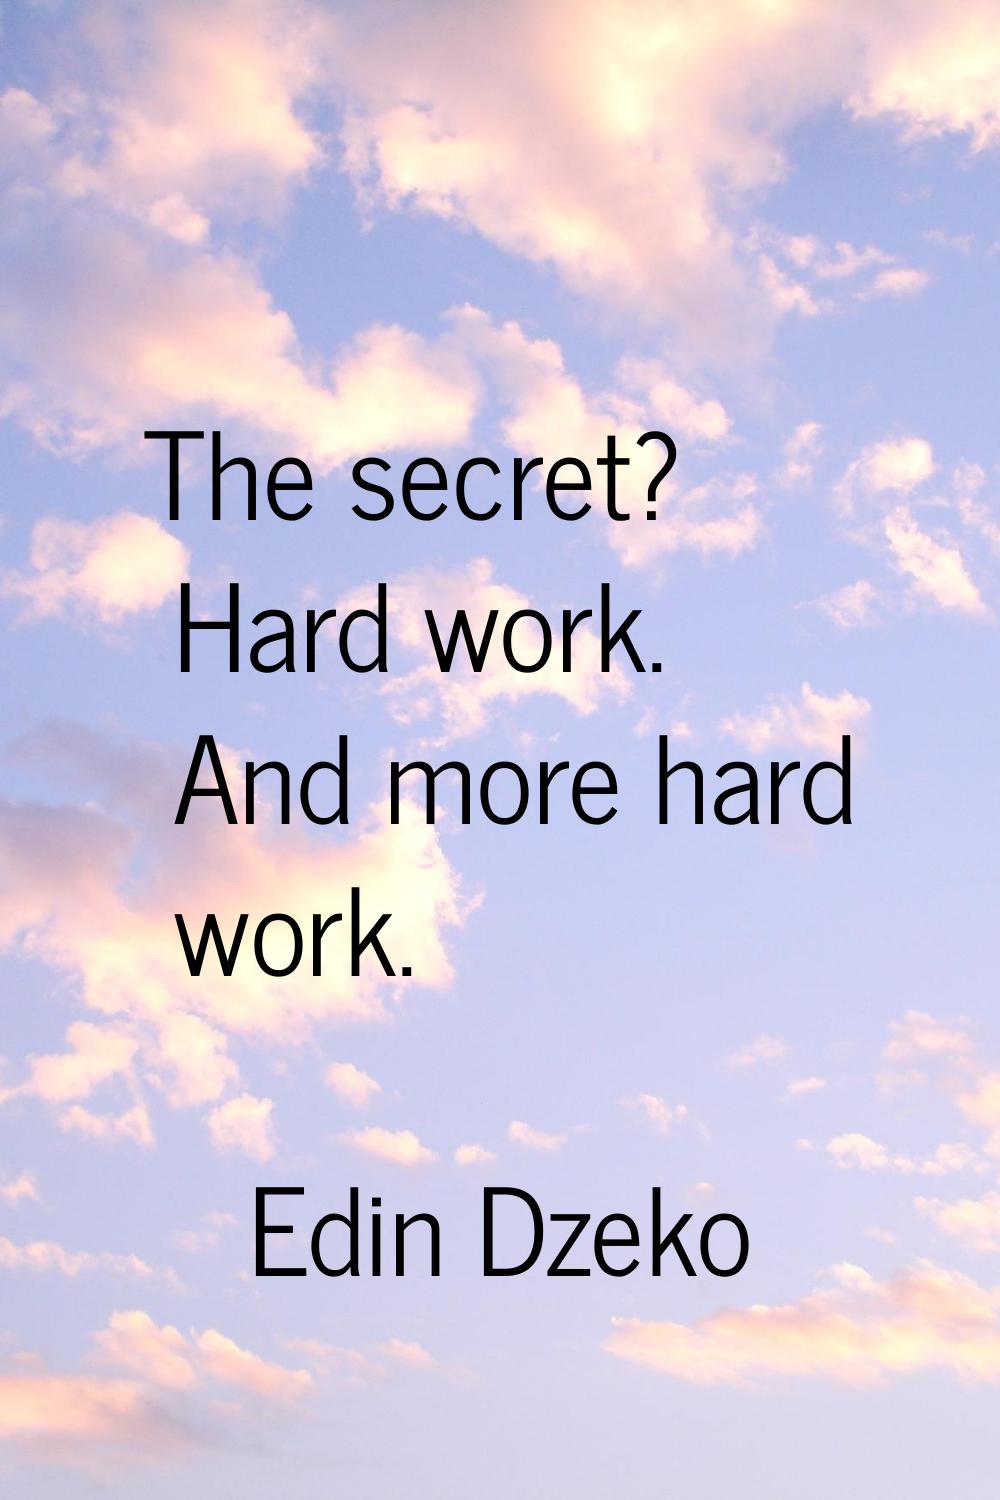 The secret? Hard work. And more hard work.